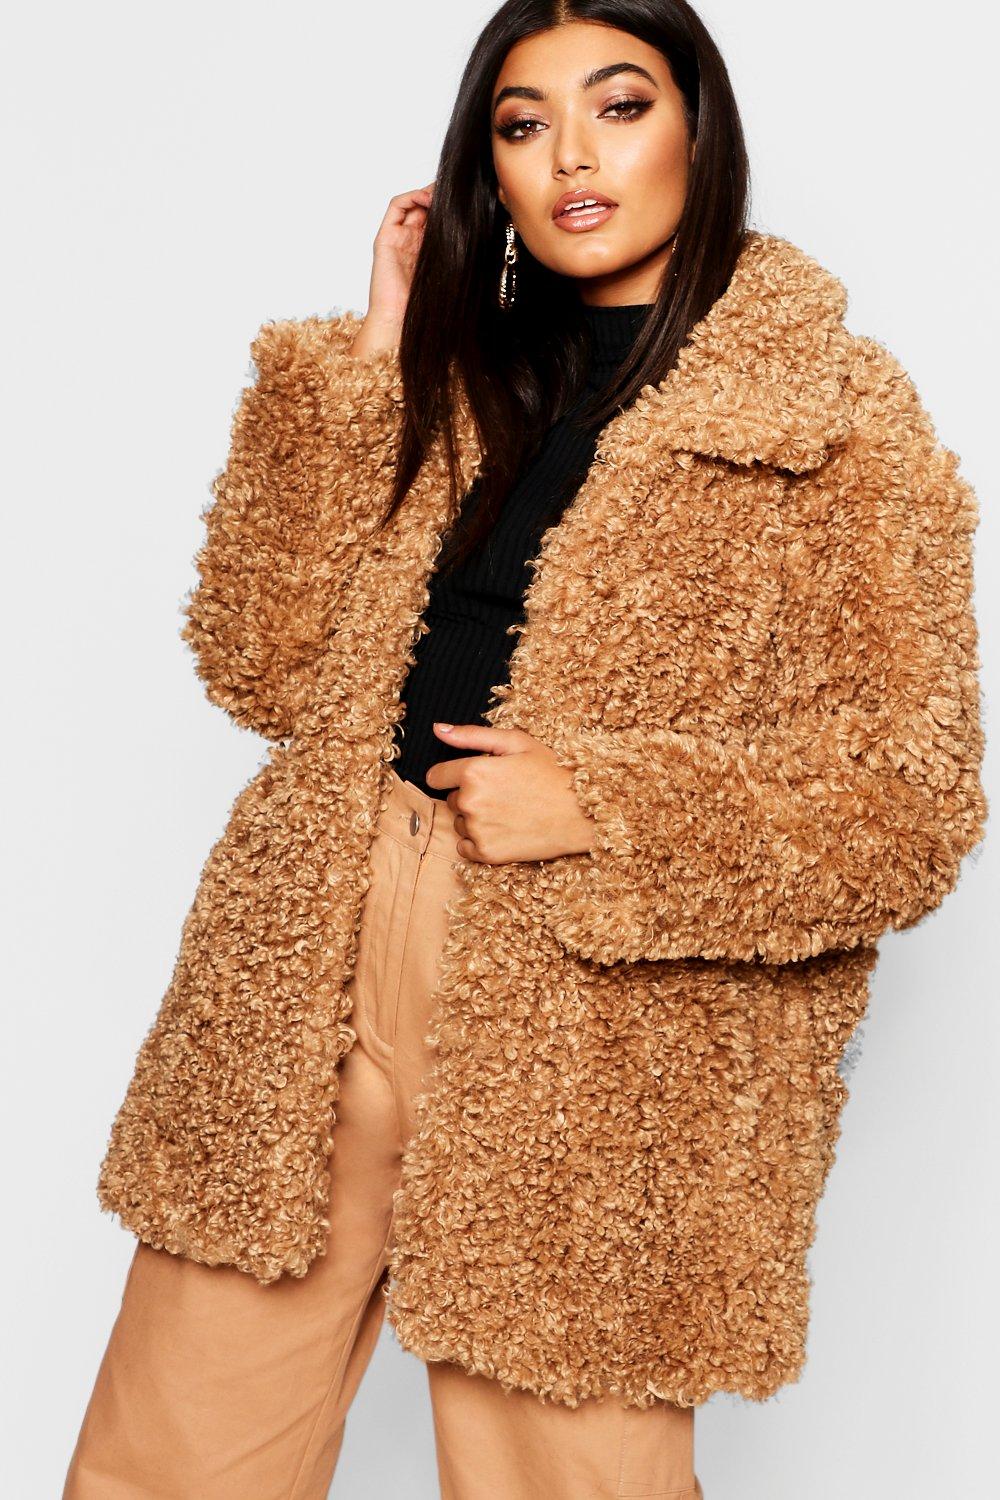 How to Style a Teddy Coat: 9 Outfit Ideas for this Fall/Winter